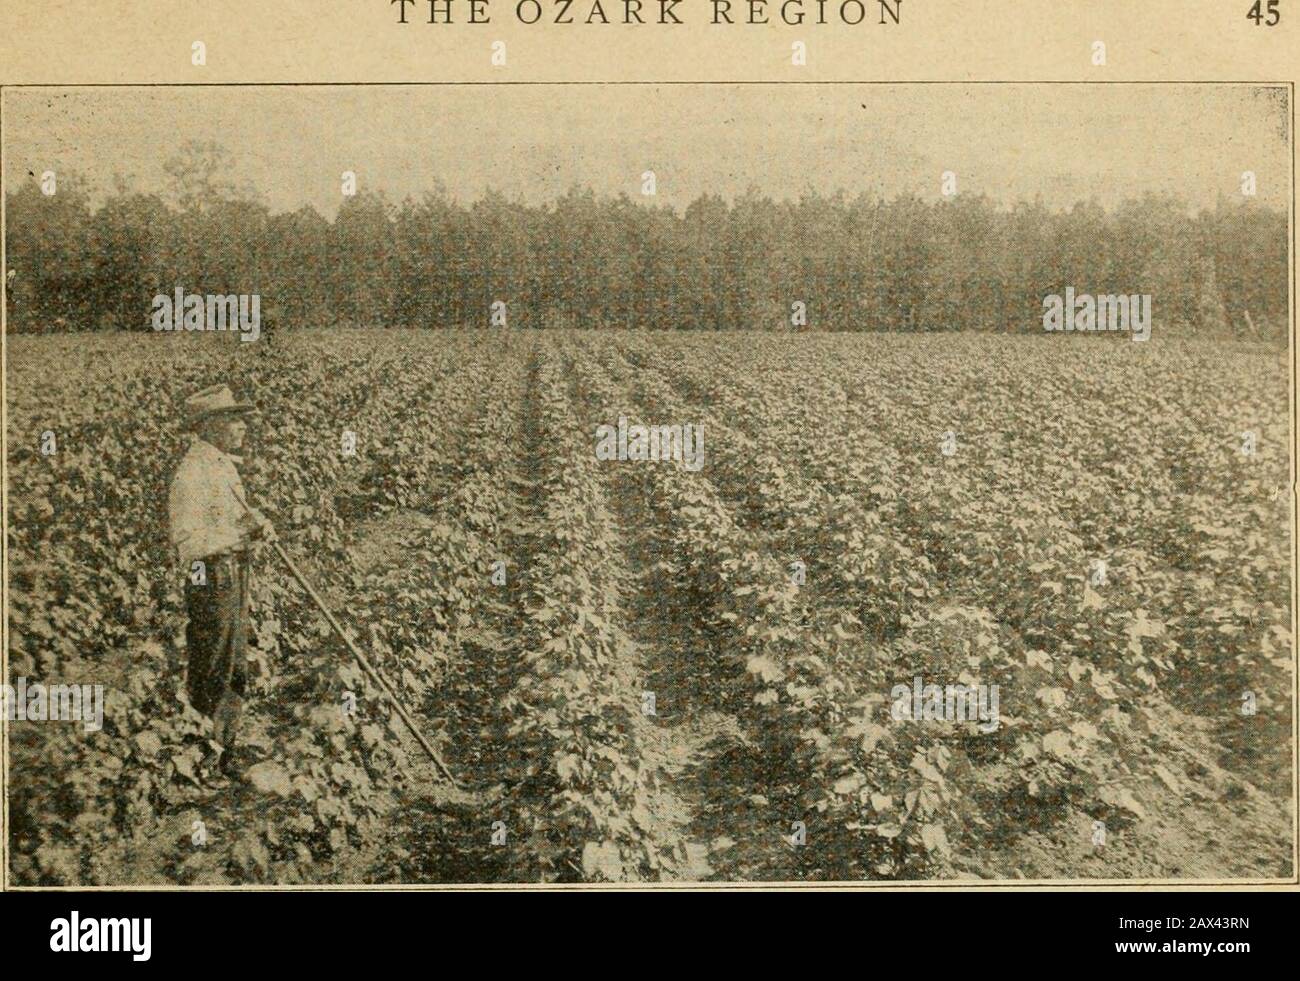 The Ozark Mountain region of Missouri and Arkansas as it appears along the line of the Kansas City southern railway . IN THE ORCHARD OF THE SOUTHERN ORCHARD PLANTING CO., HORATIO, ARK. THE OZARK REGION. YOUNG COTTON FIELD, HORATIO, ARK. pumping station, the county jail, ice plant,bottling works and nearly all mercantilehouses. The dwellings are substantialframe buildings of modern design. Nearly all the streets are graded and thesidewalks paved with cement or concrete.Free mail delivery, rural telephones, elec-tric light service, etc., are not novelties inDe Queen. The city has six religious c Stock Photo